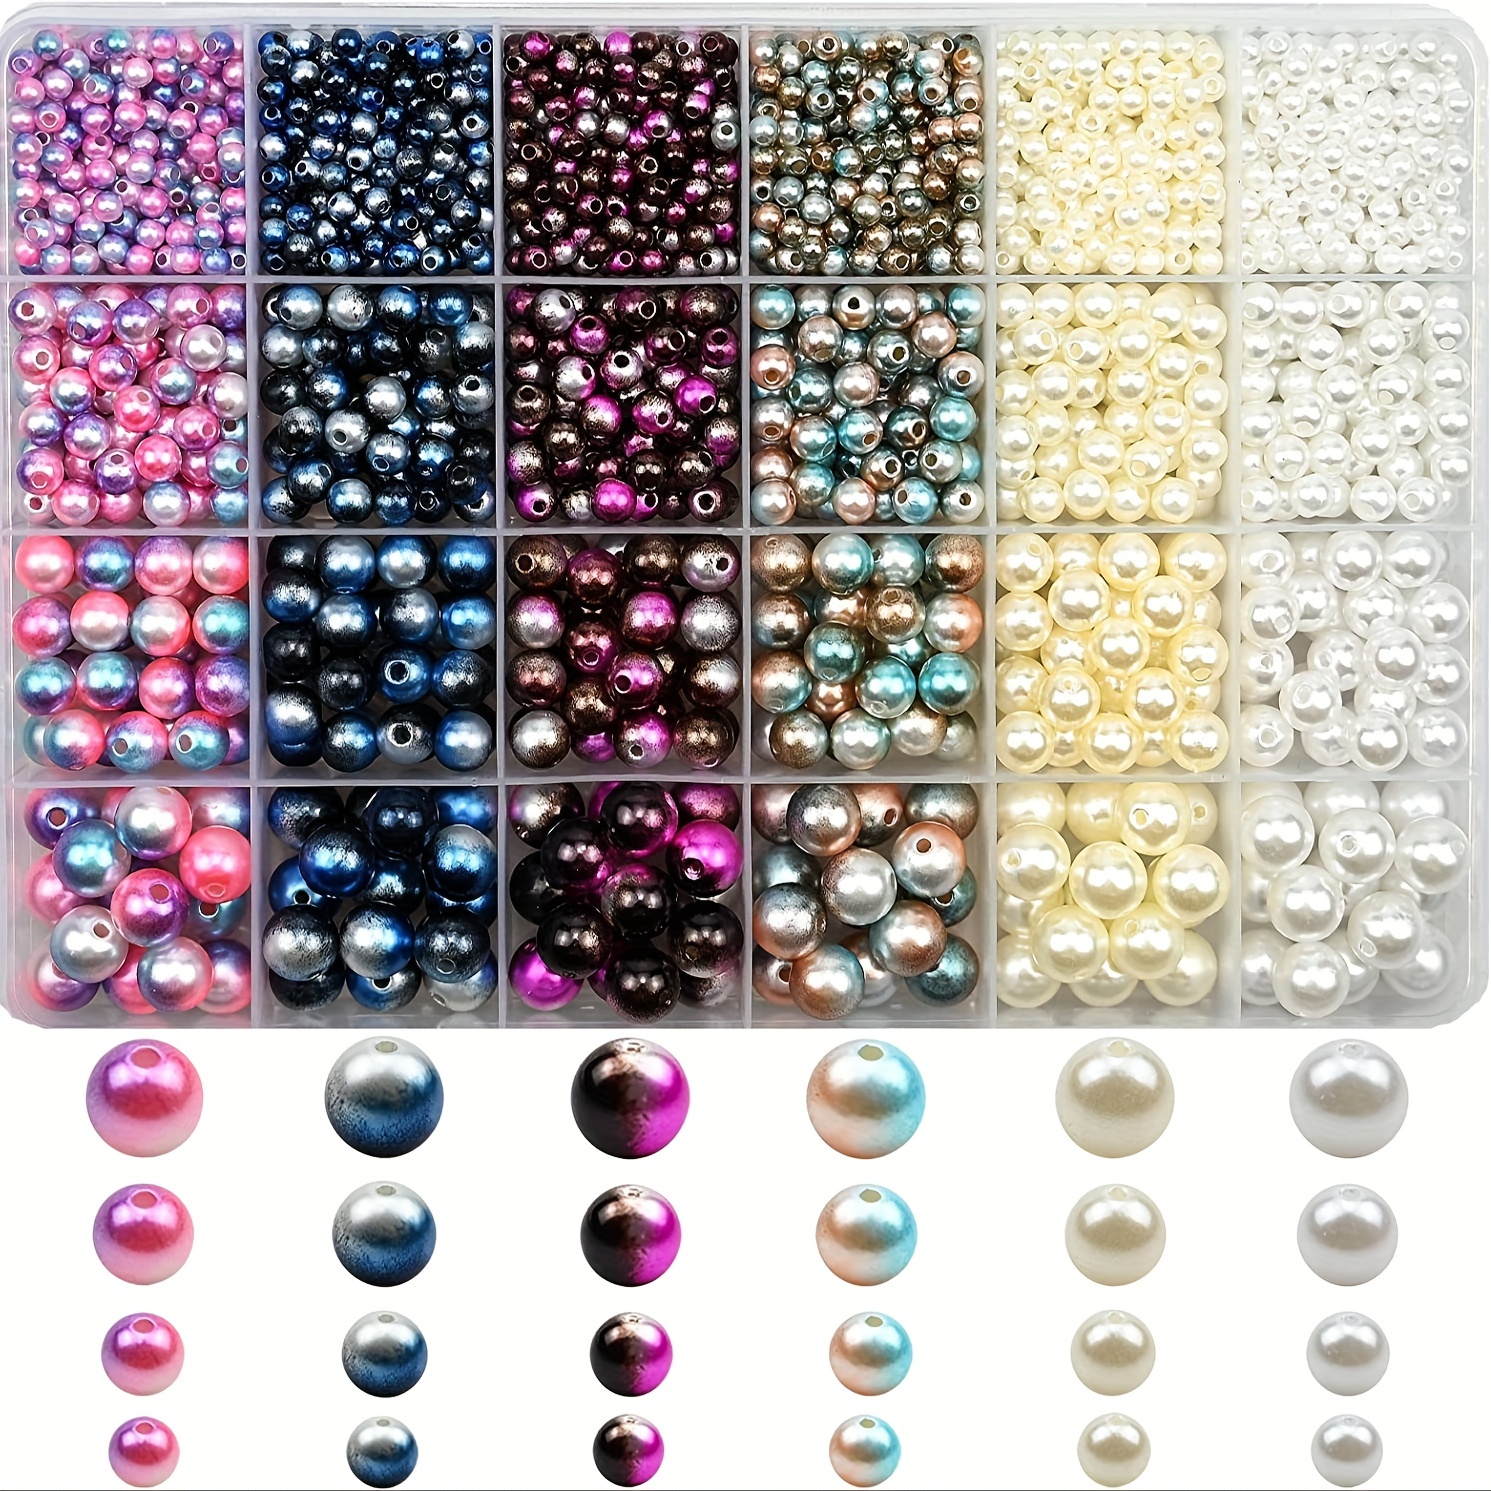 400 Self Adhesive Pearls 6mm Small Round Pearl Stick On Adhesive Beads  Embellishment (Metallic Silver)